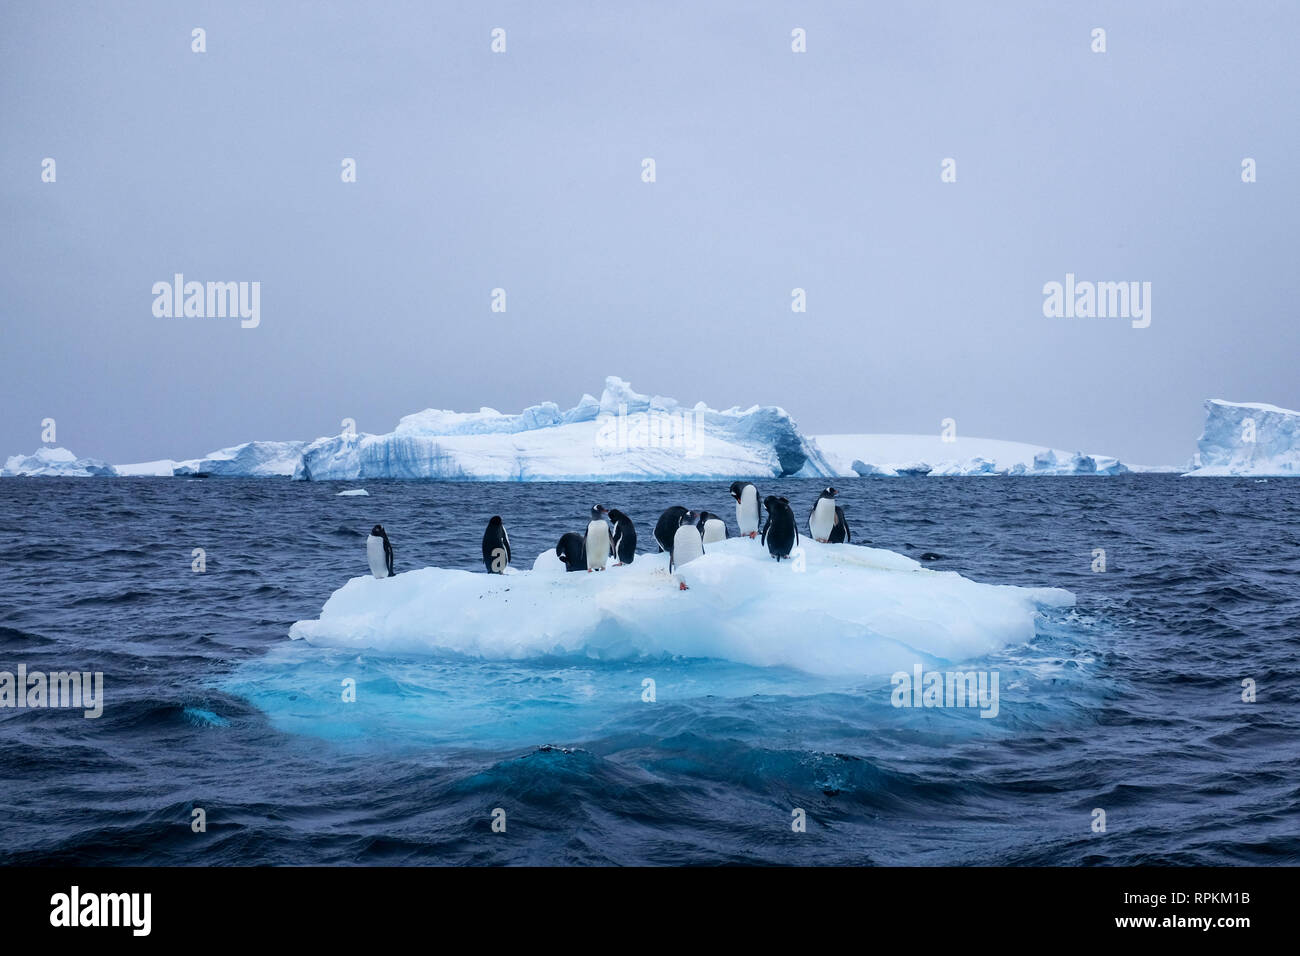 Snow, ice, glaciers, ocean water, clouds and penguins - a typical scene for Antarctica tourism - on a cold overcast day Stock Photo